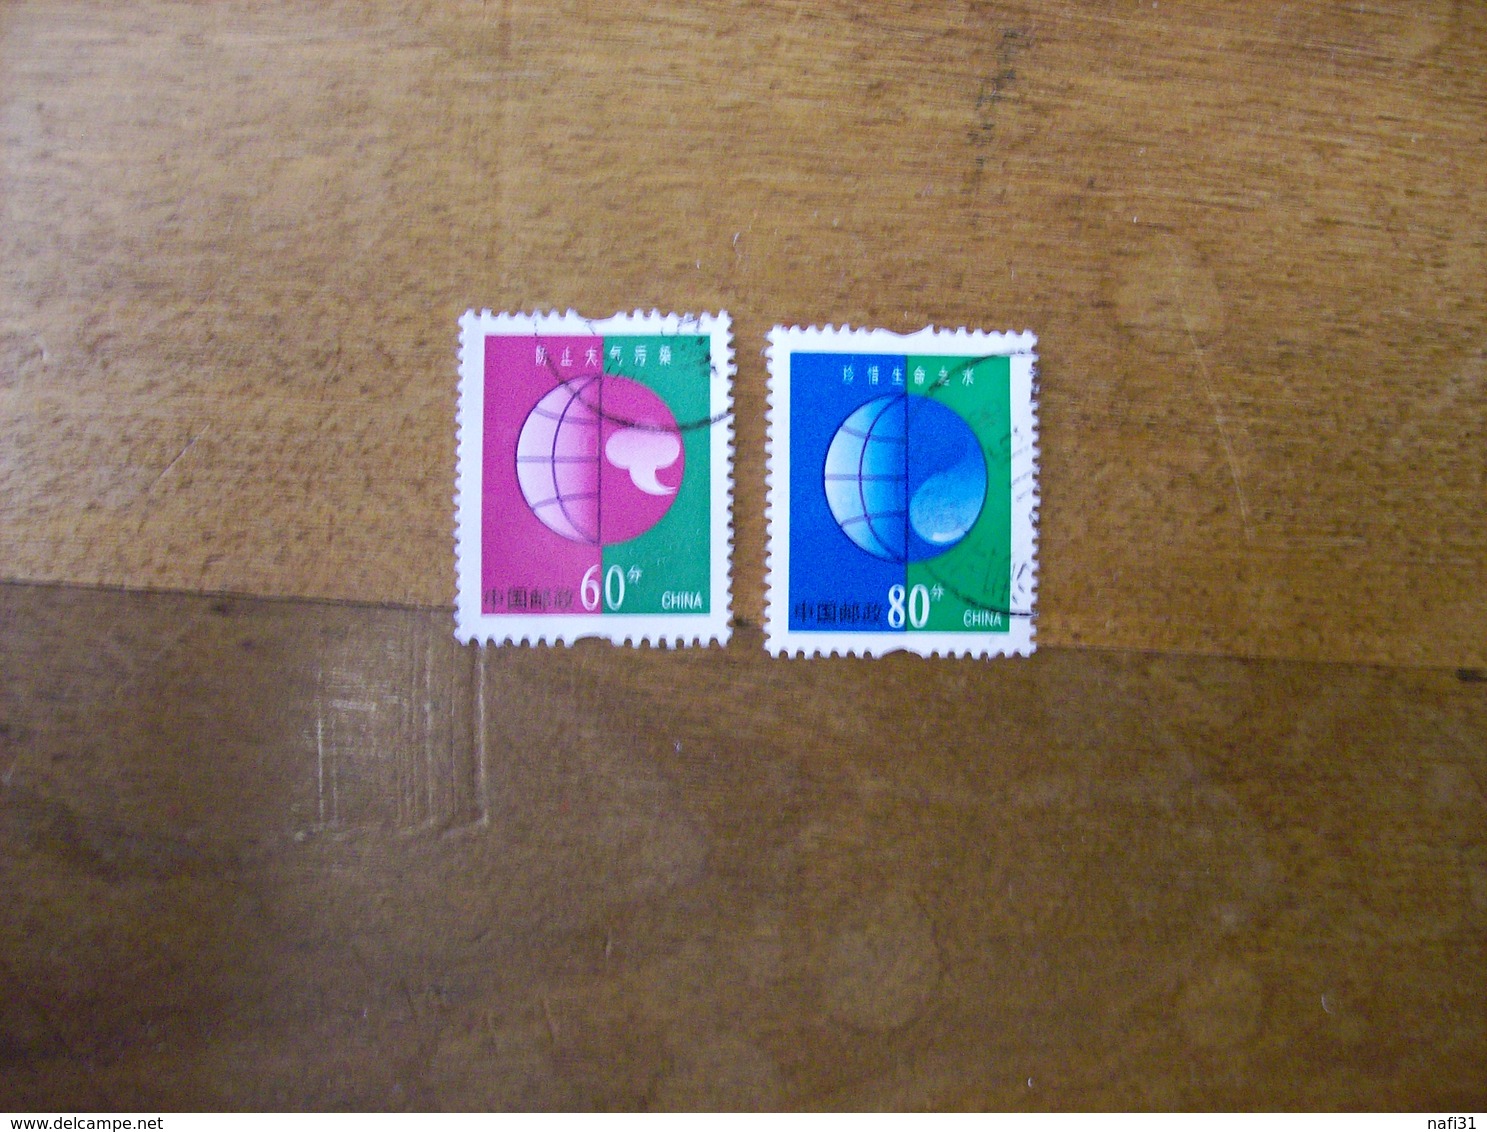 CHINE Tp Courant X 2 Annee 2002 - Used Stamps